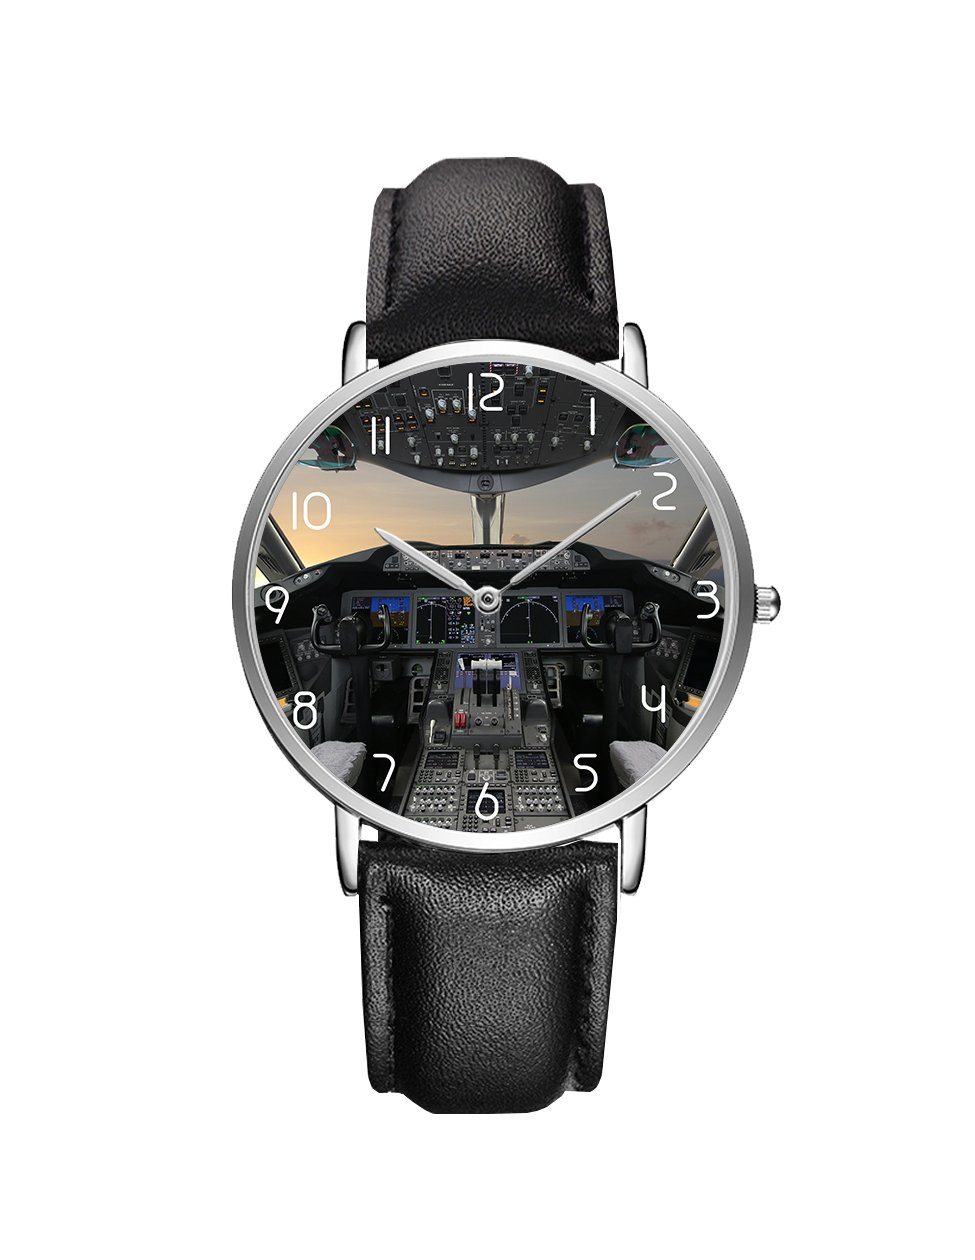 Boeing 787 Cockpit Leather Strap Watches Pilot Eyes Store Silver & Black Leather Strap 